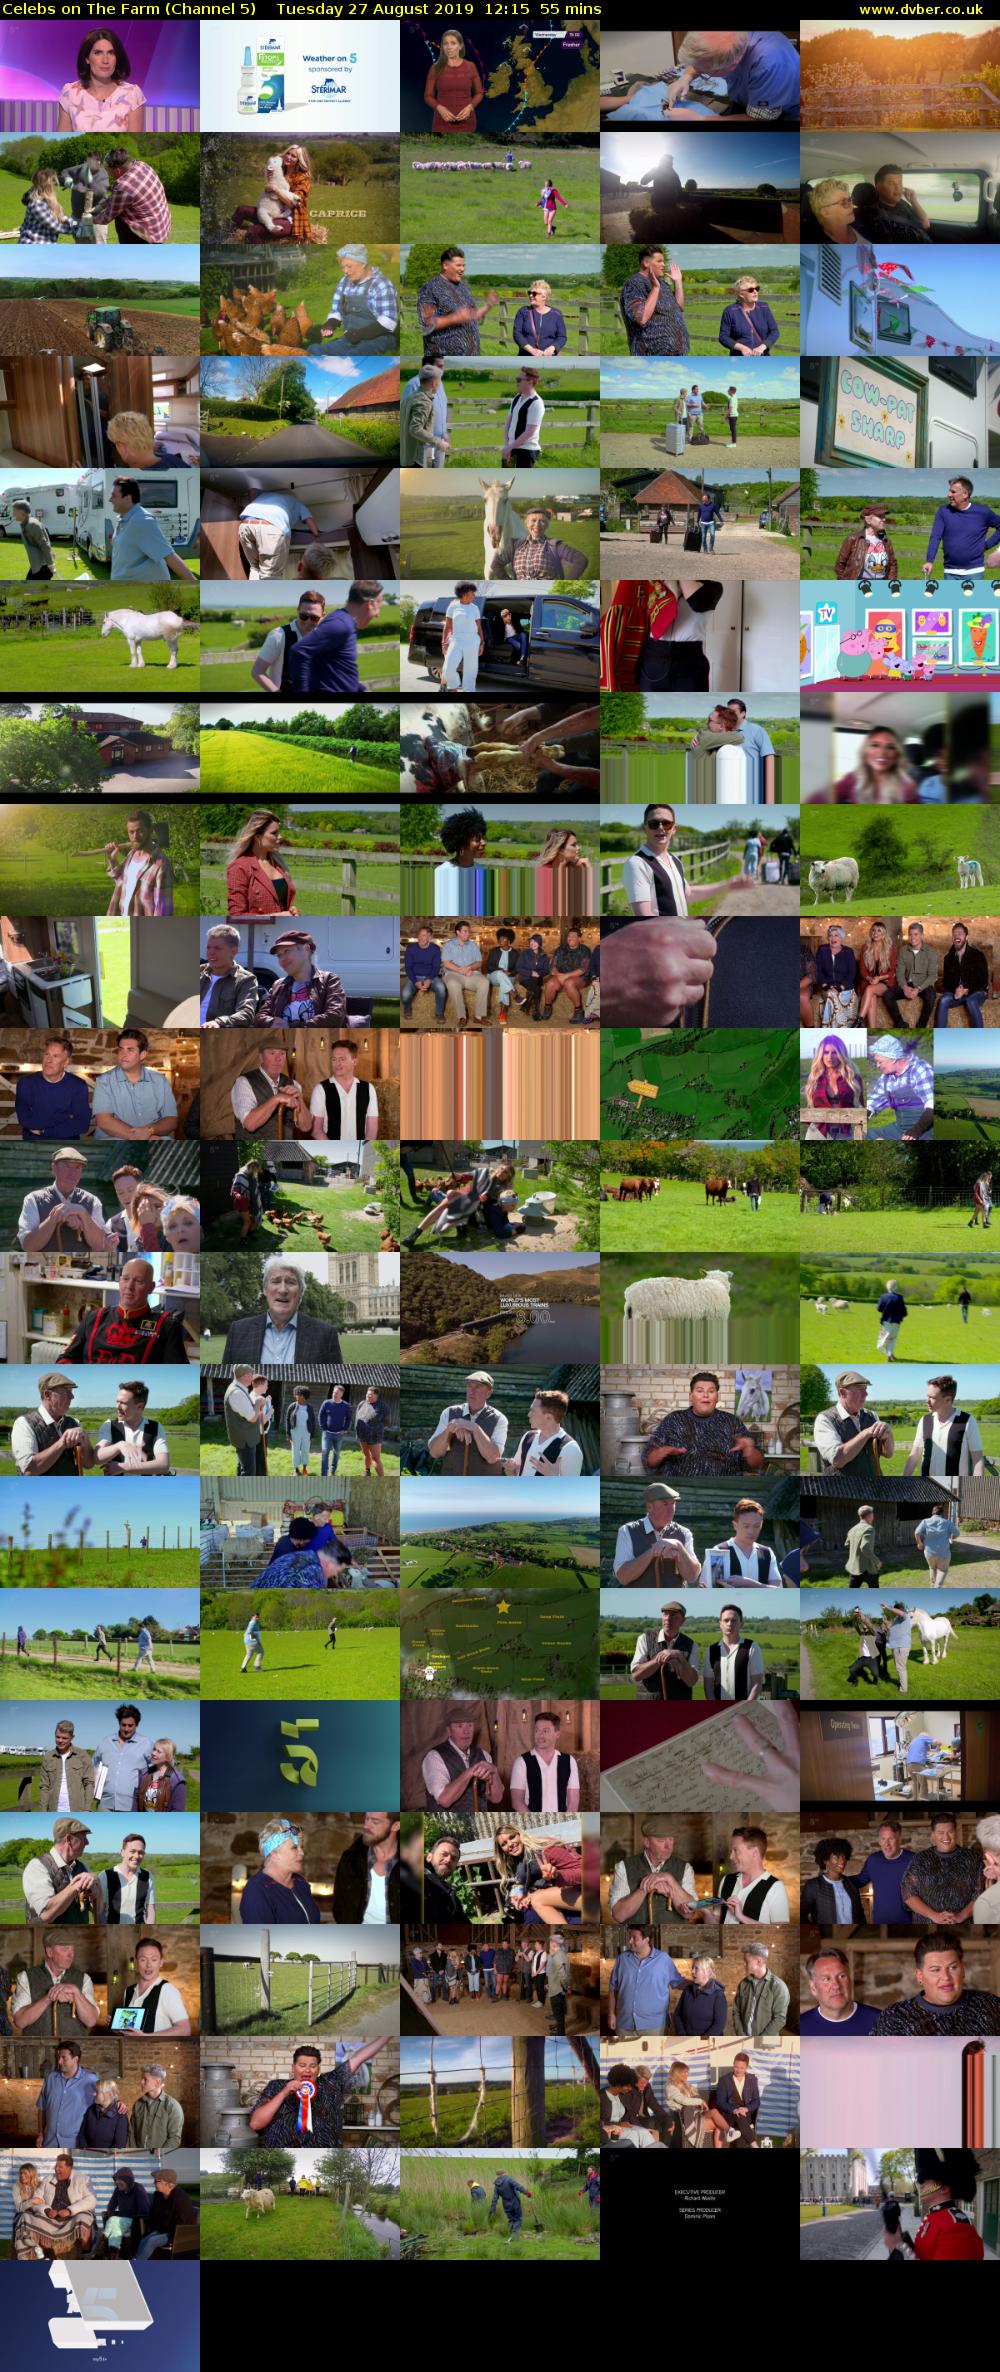 Celebs on The Farm (Channel 5) Tuesday 27 August 2019 12:15 - 13:10